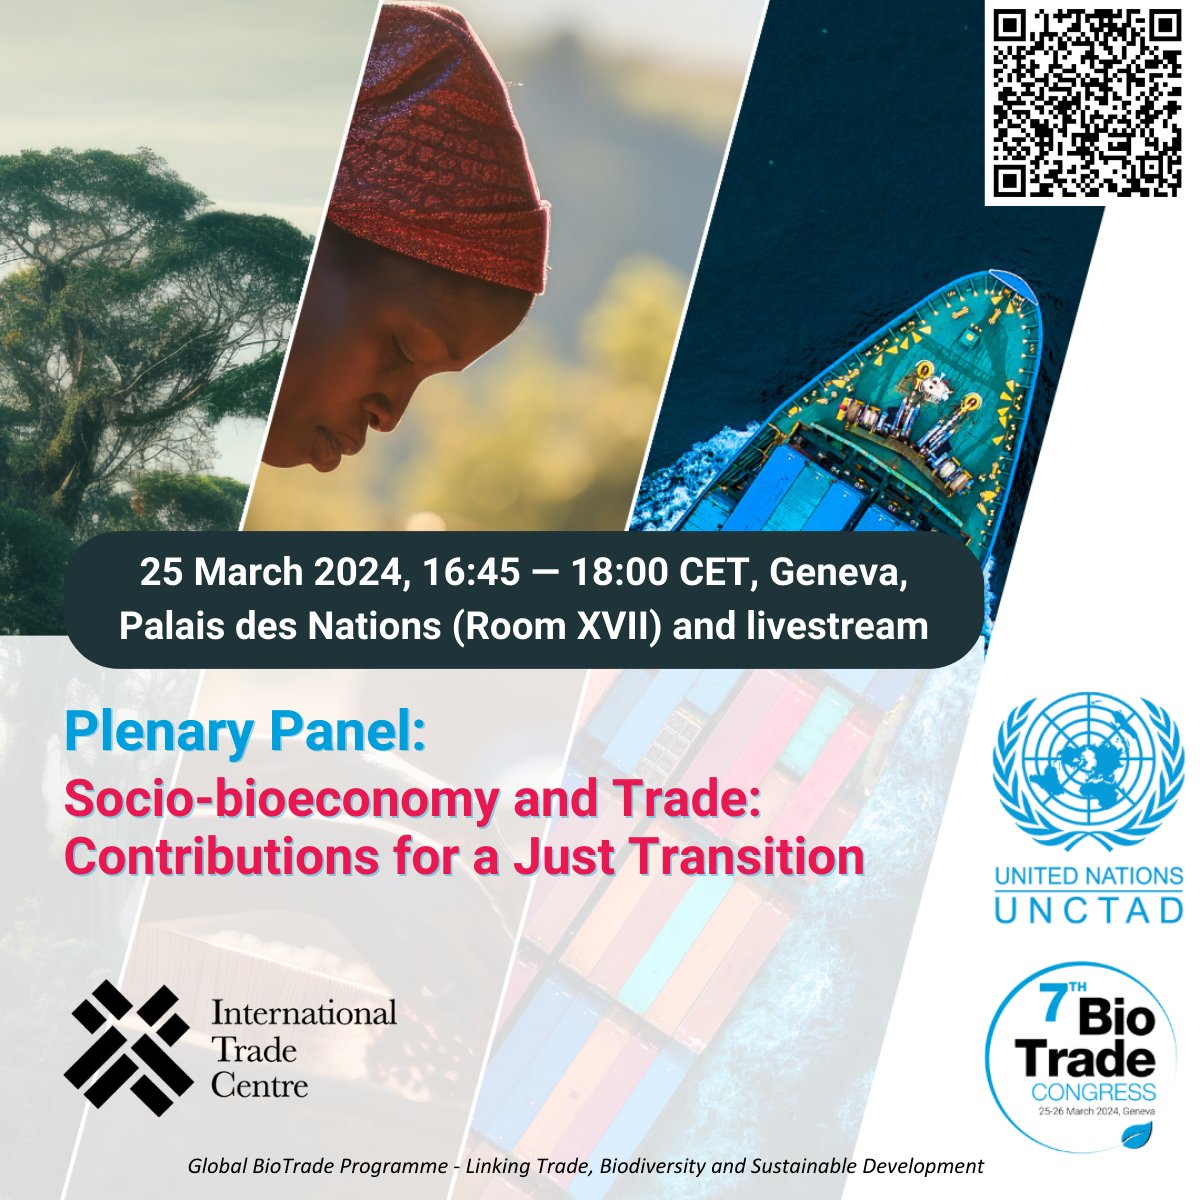 Coming up next @UNCTAD's 7th BioTrade Congress: Watch the plenary session on 'Social Bioeconomy and Trade: Contributions for a Just Transition' organised by the @ITCnews. Register here: bit.ly/BioTrade-Congr… #BioTrade #BiodiversityPlan #Biodiversity #Trade